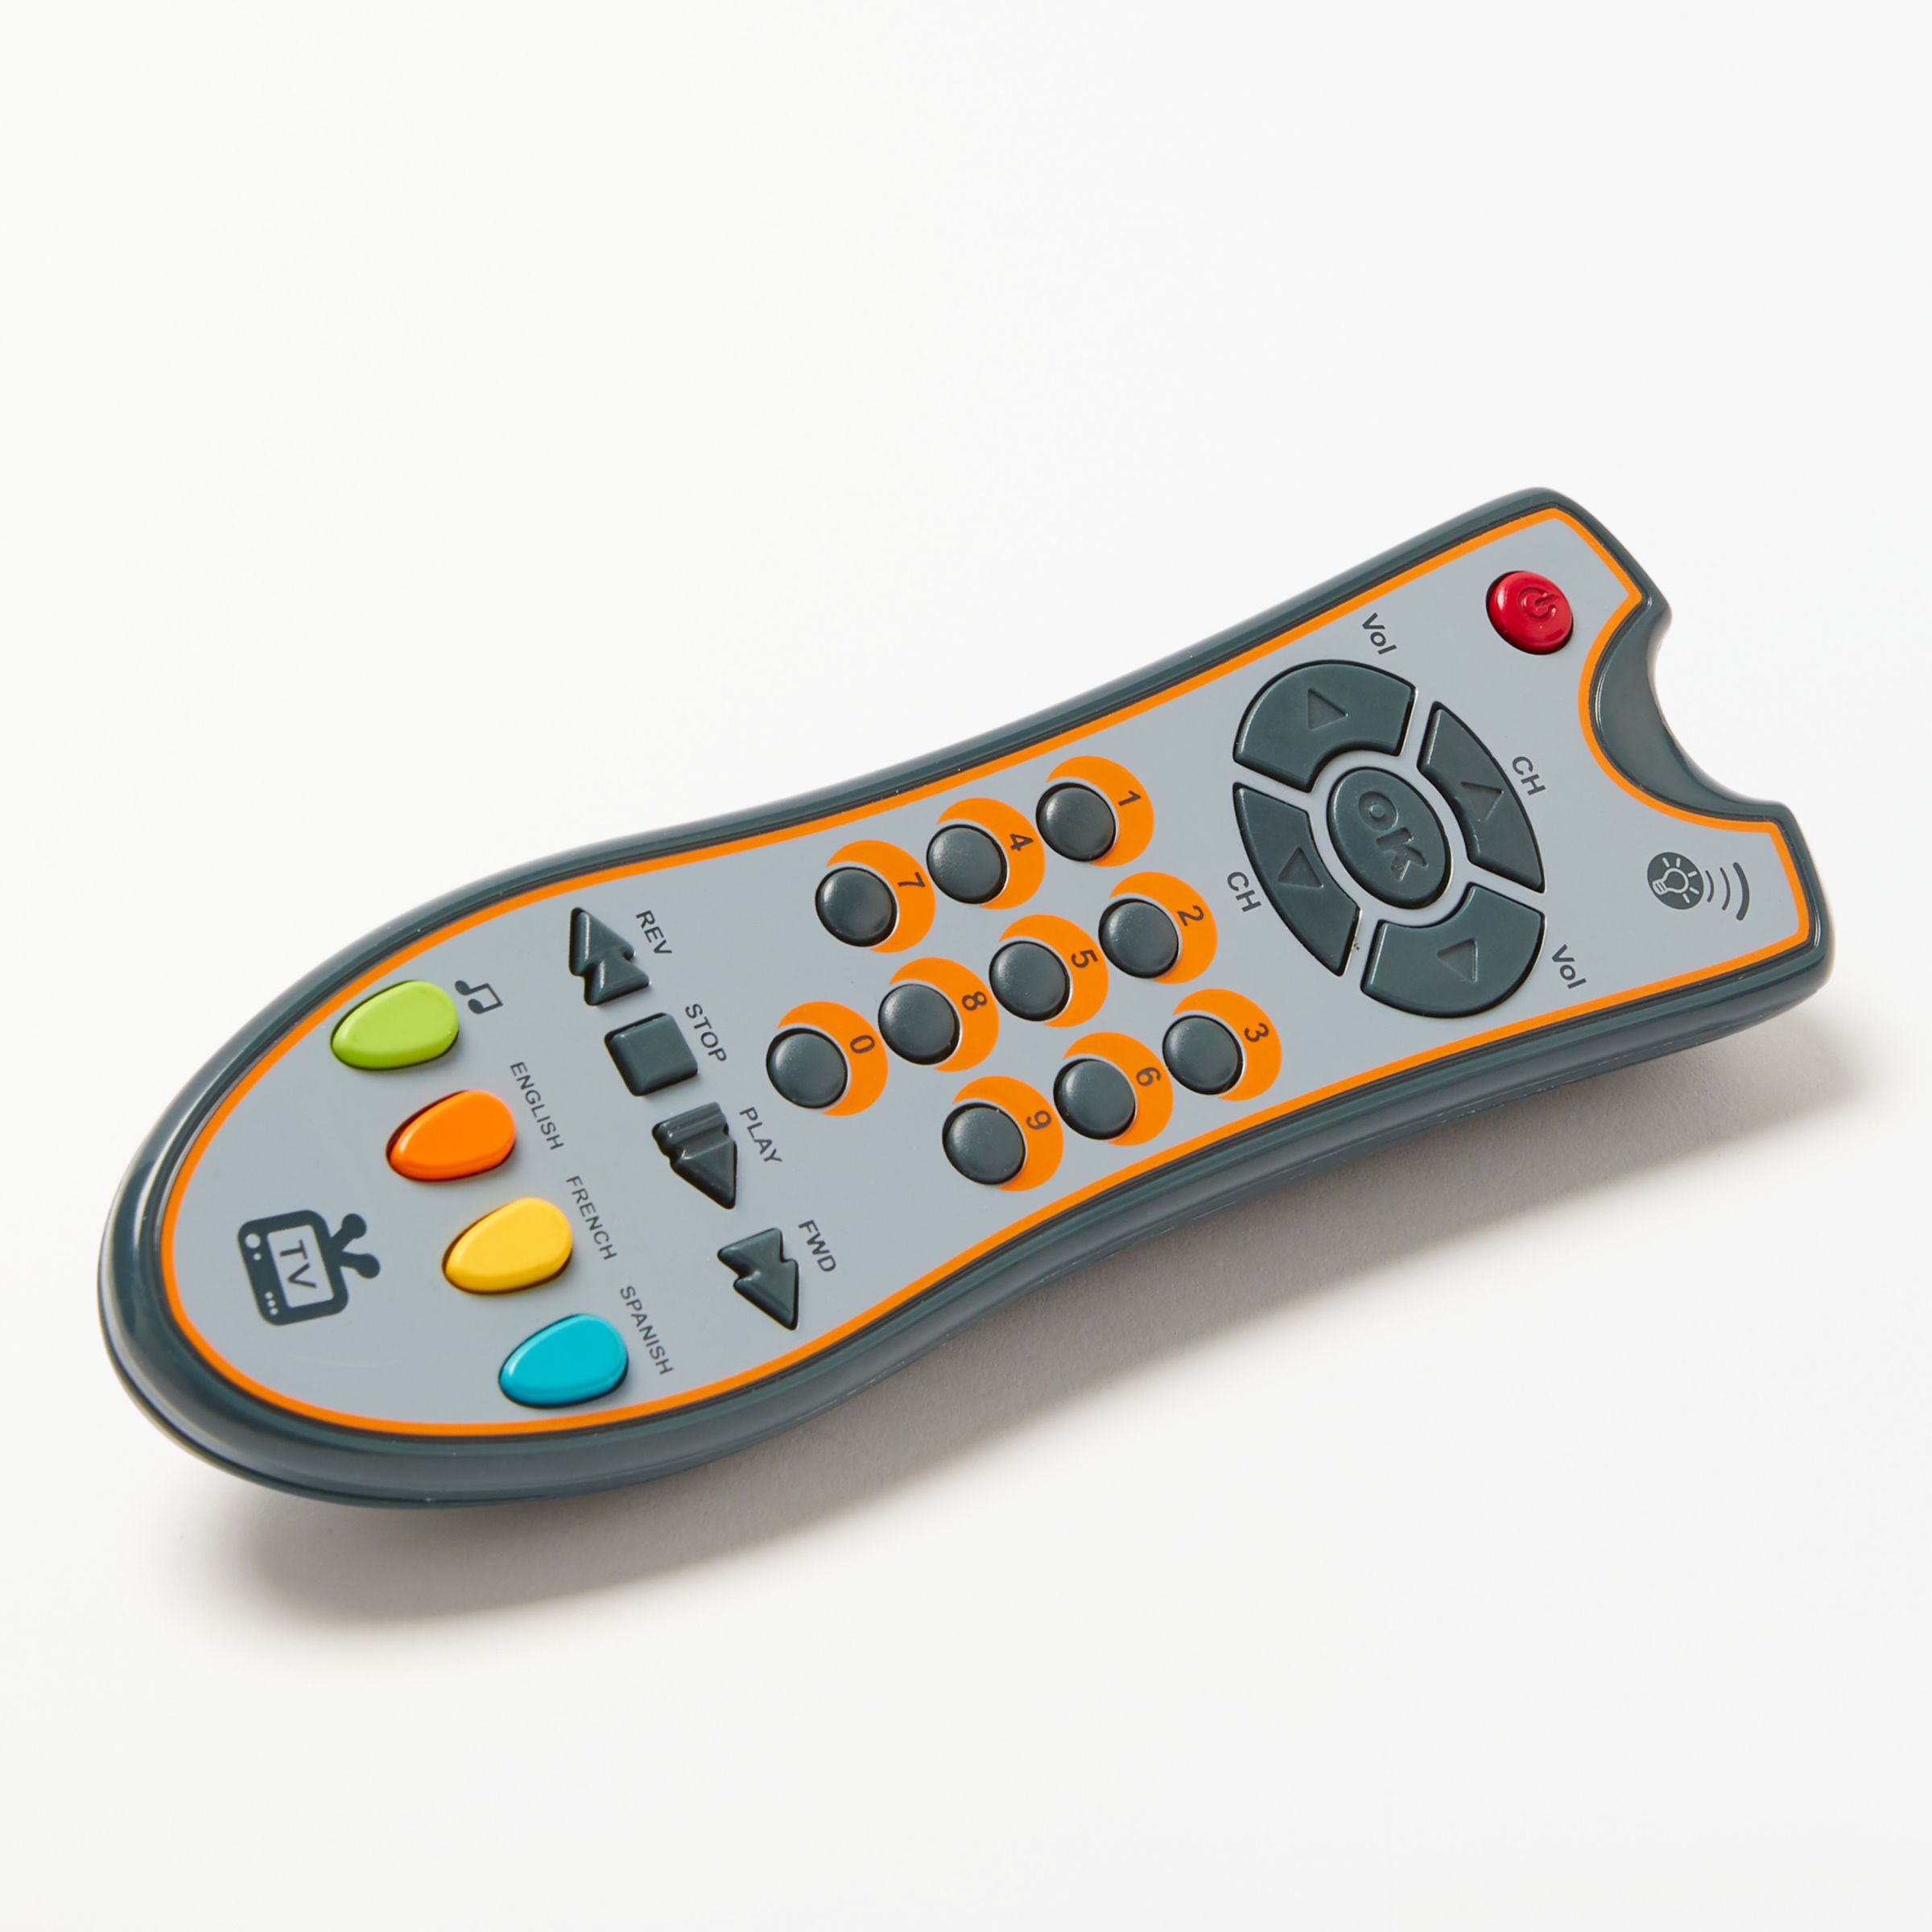 fake remote control for babies